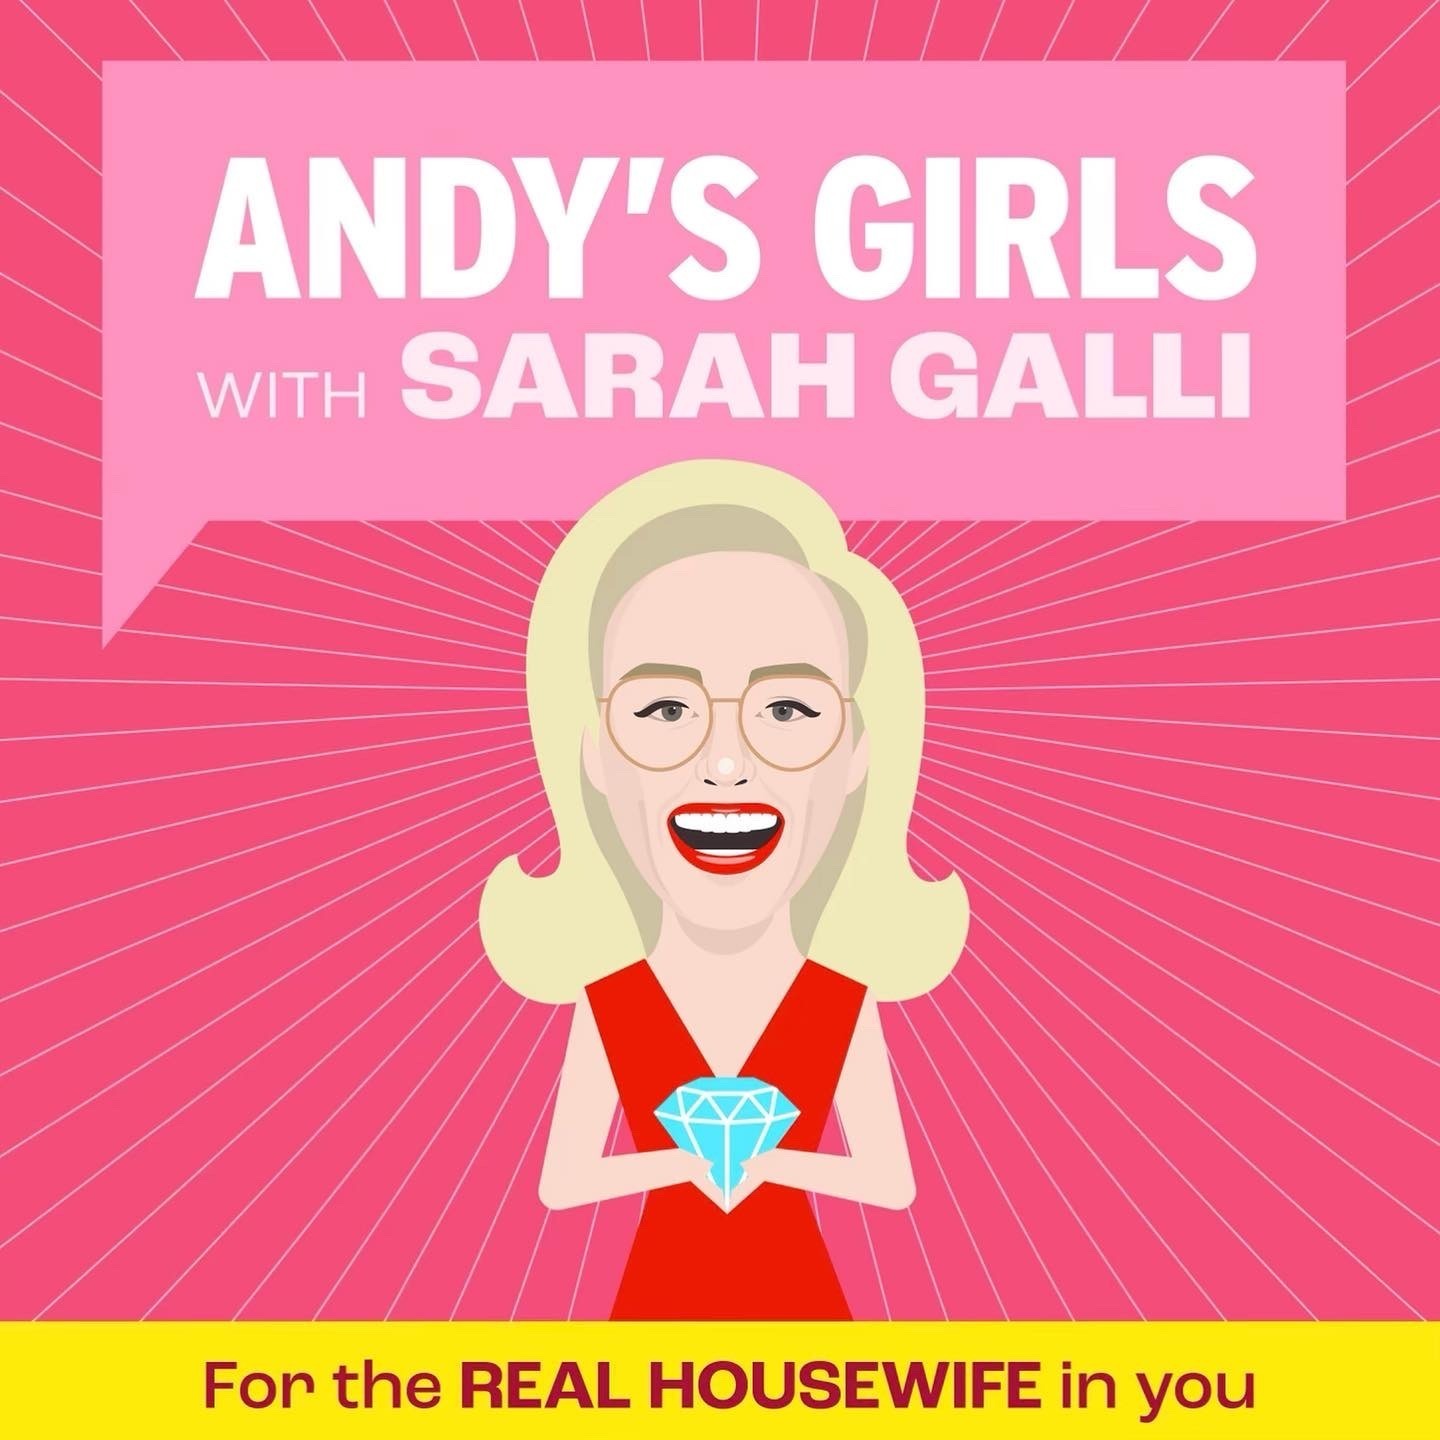 Lady Gaga Pussy Slip Lindsay Lohan - Andy's Girls: A Real Housewives Podcast | RedCircle